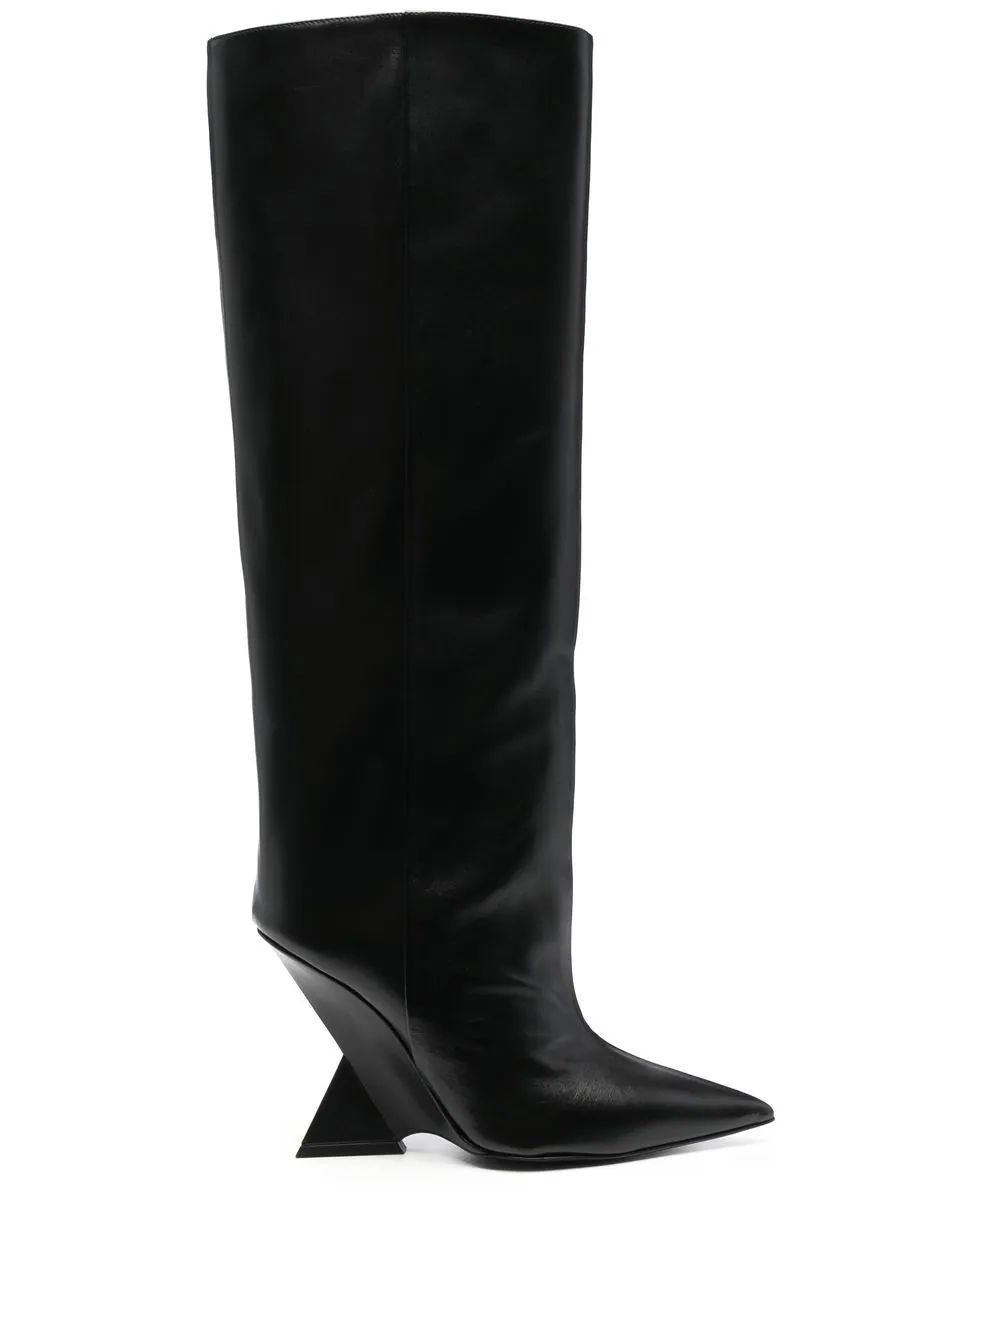 Leather Tube Boots with Iconic Pyramid Heel - Black